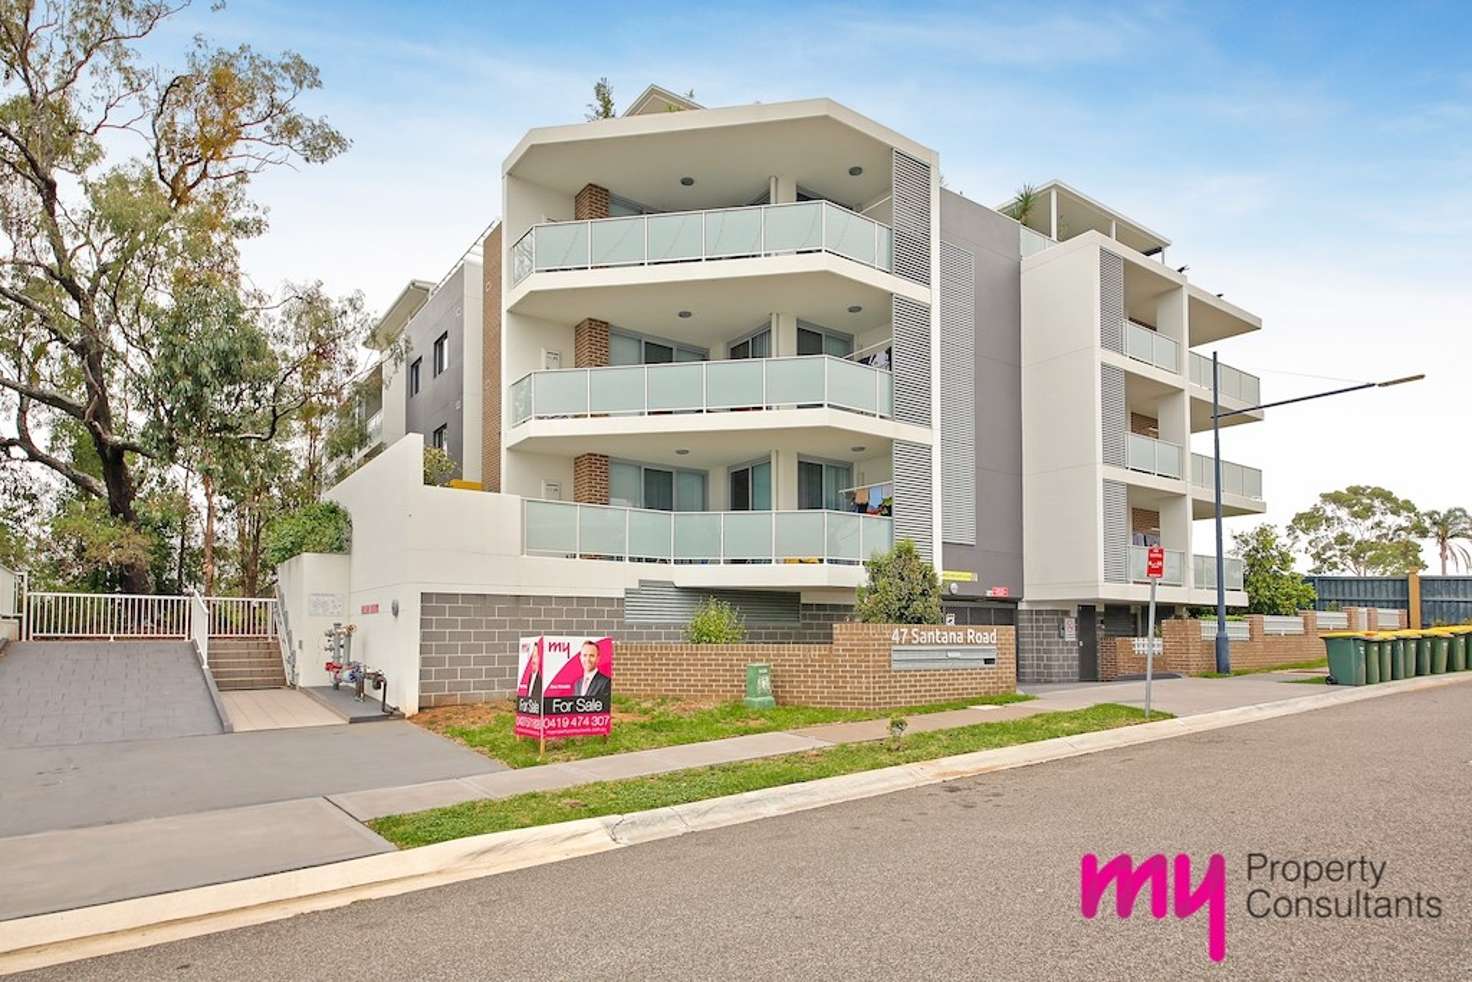 Main view of Homely apartment listing, 2/47 Santana Road, Campbelltown NSW 2560